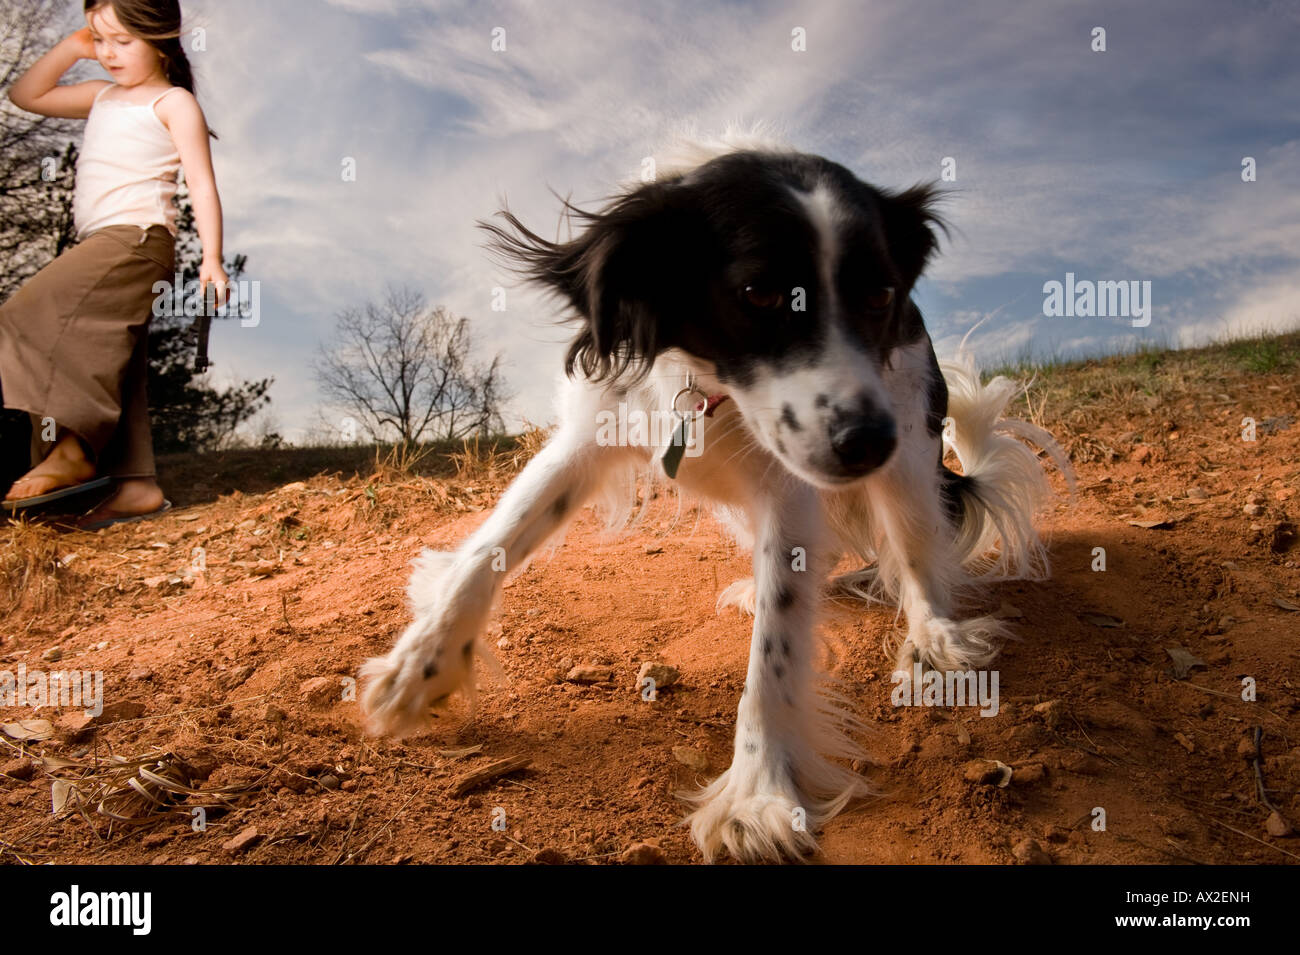 A girl walks near a black and white mixed breed dog terrier and Australian Shepard on a hill in dirt before a blue sky Stock Photo